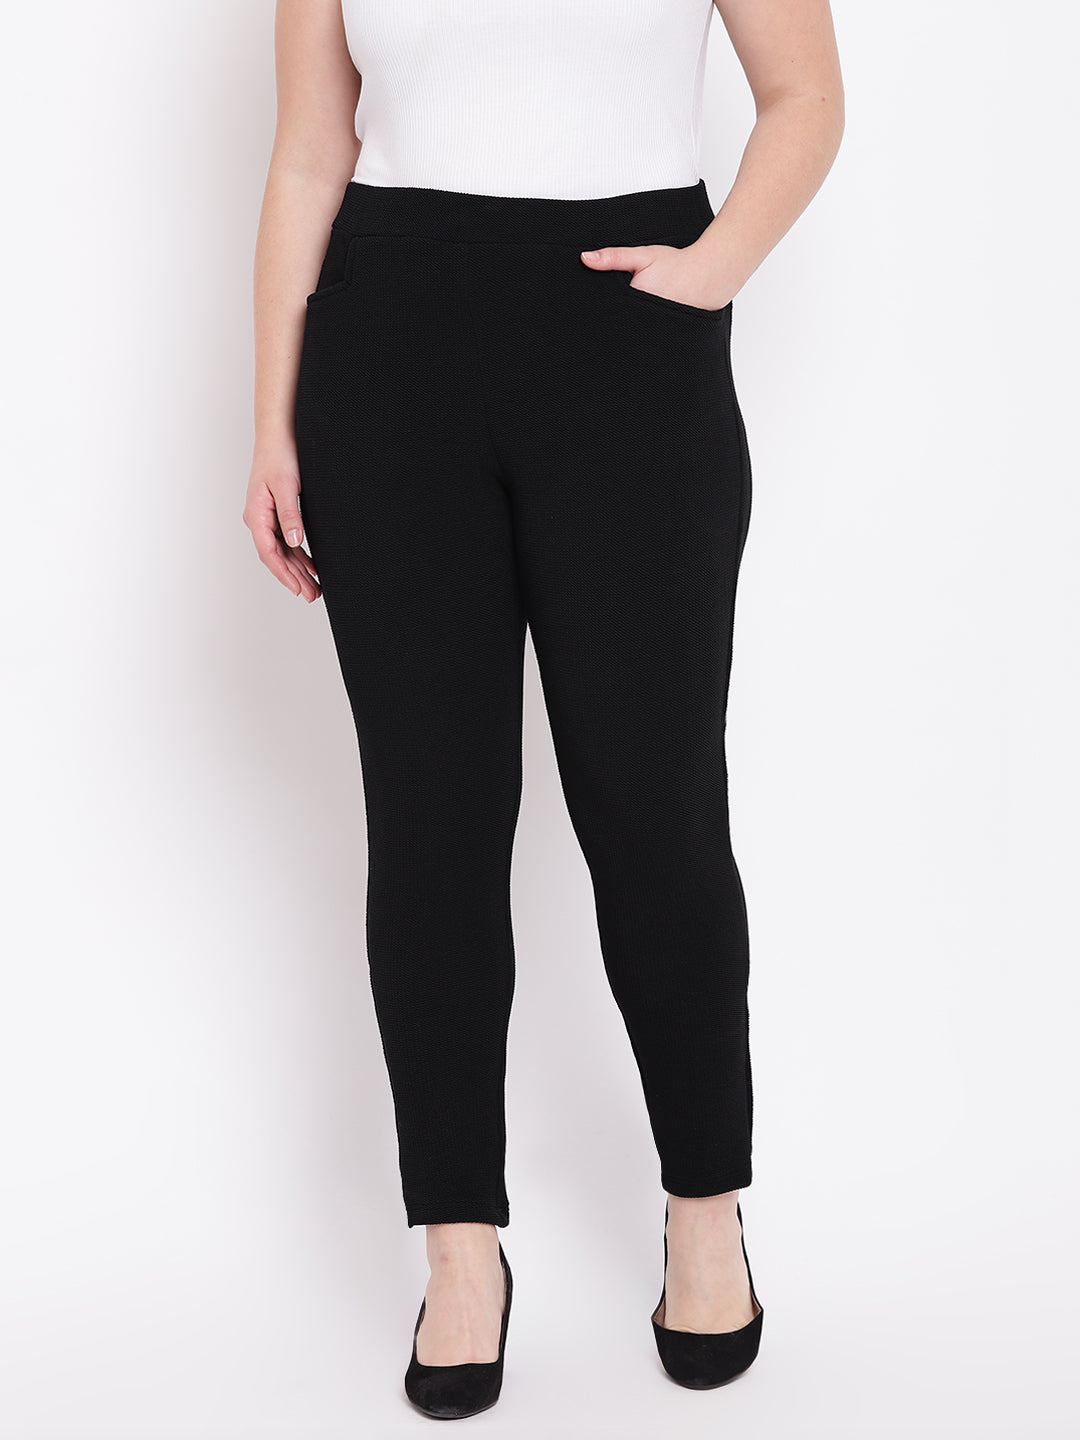 Plus Size black regular fit self design trousers For Women L to 6XL - The  Pink Moon